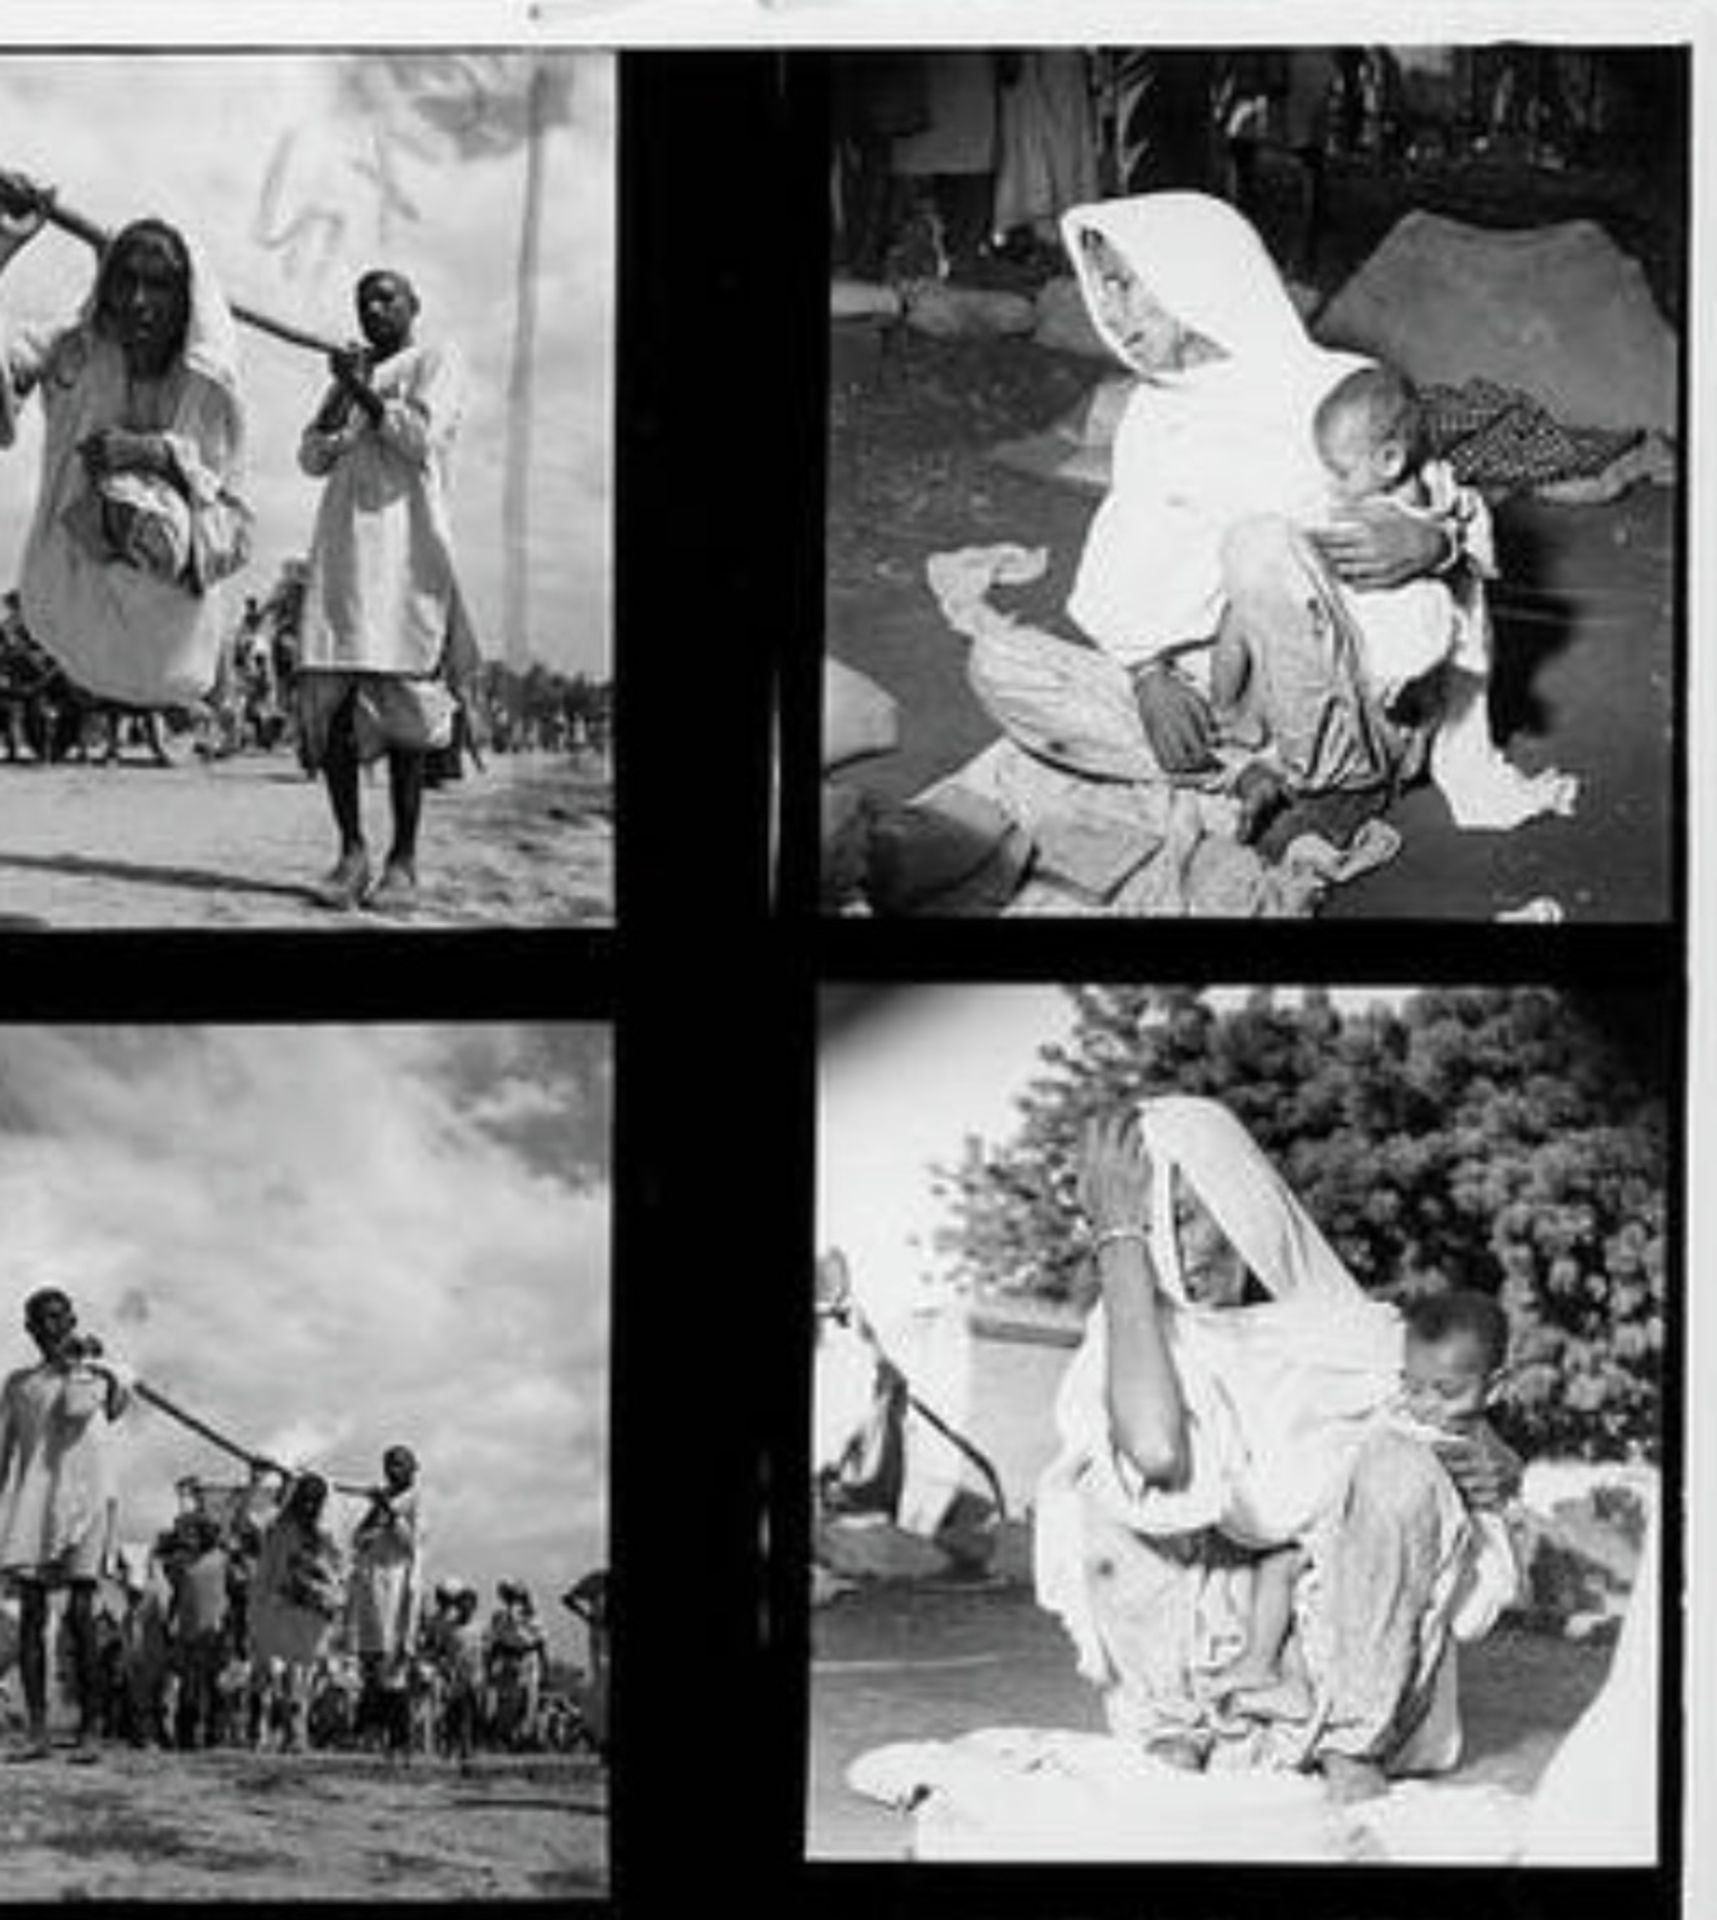 Margaret Bourke White "India Migration during Hindu-Muslim Conflict" Contact Sheet - Image 5 of 5